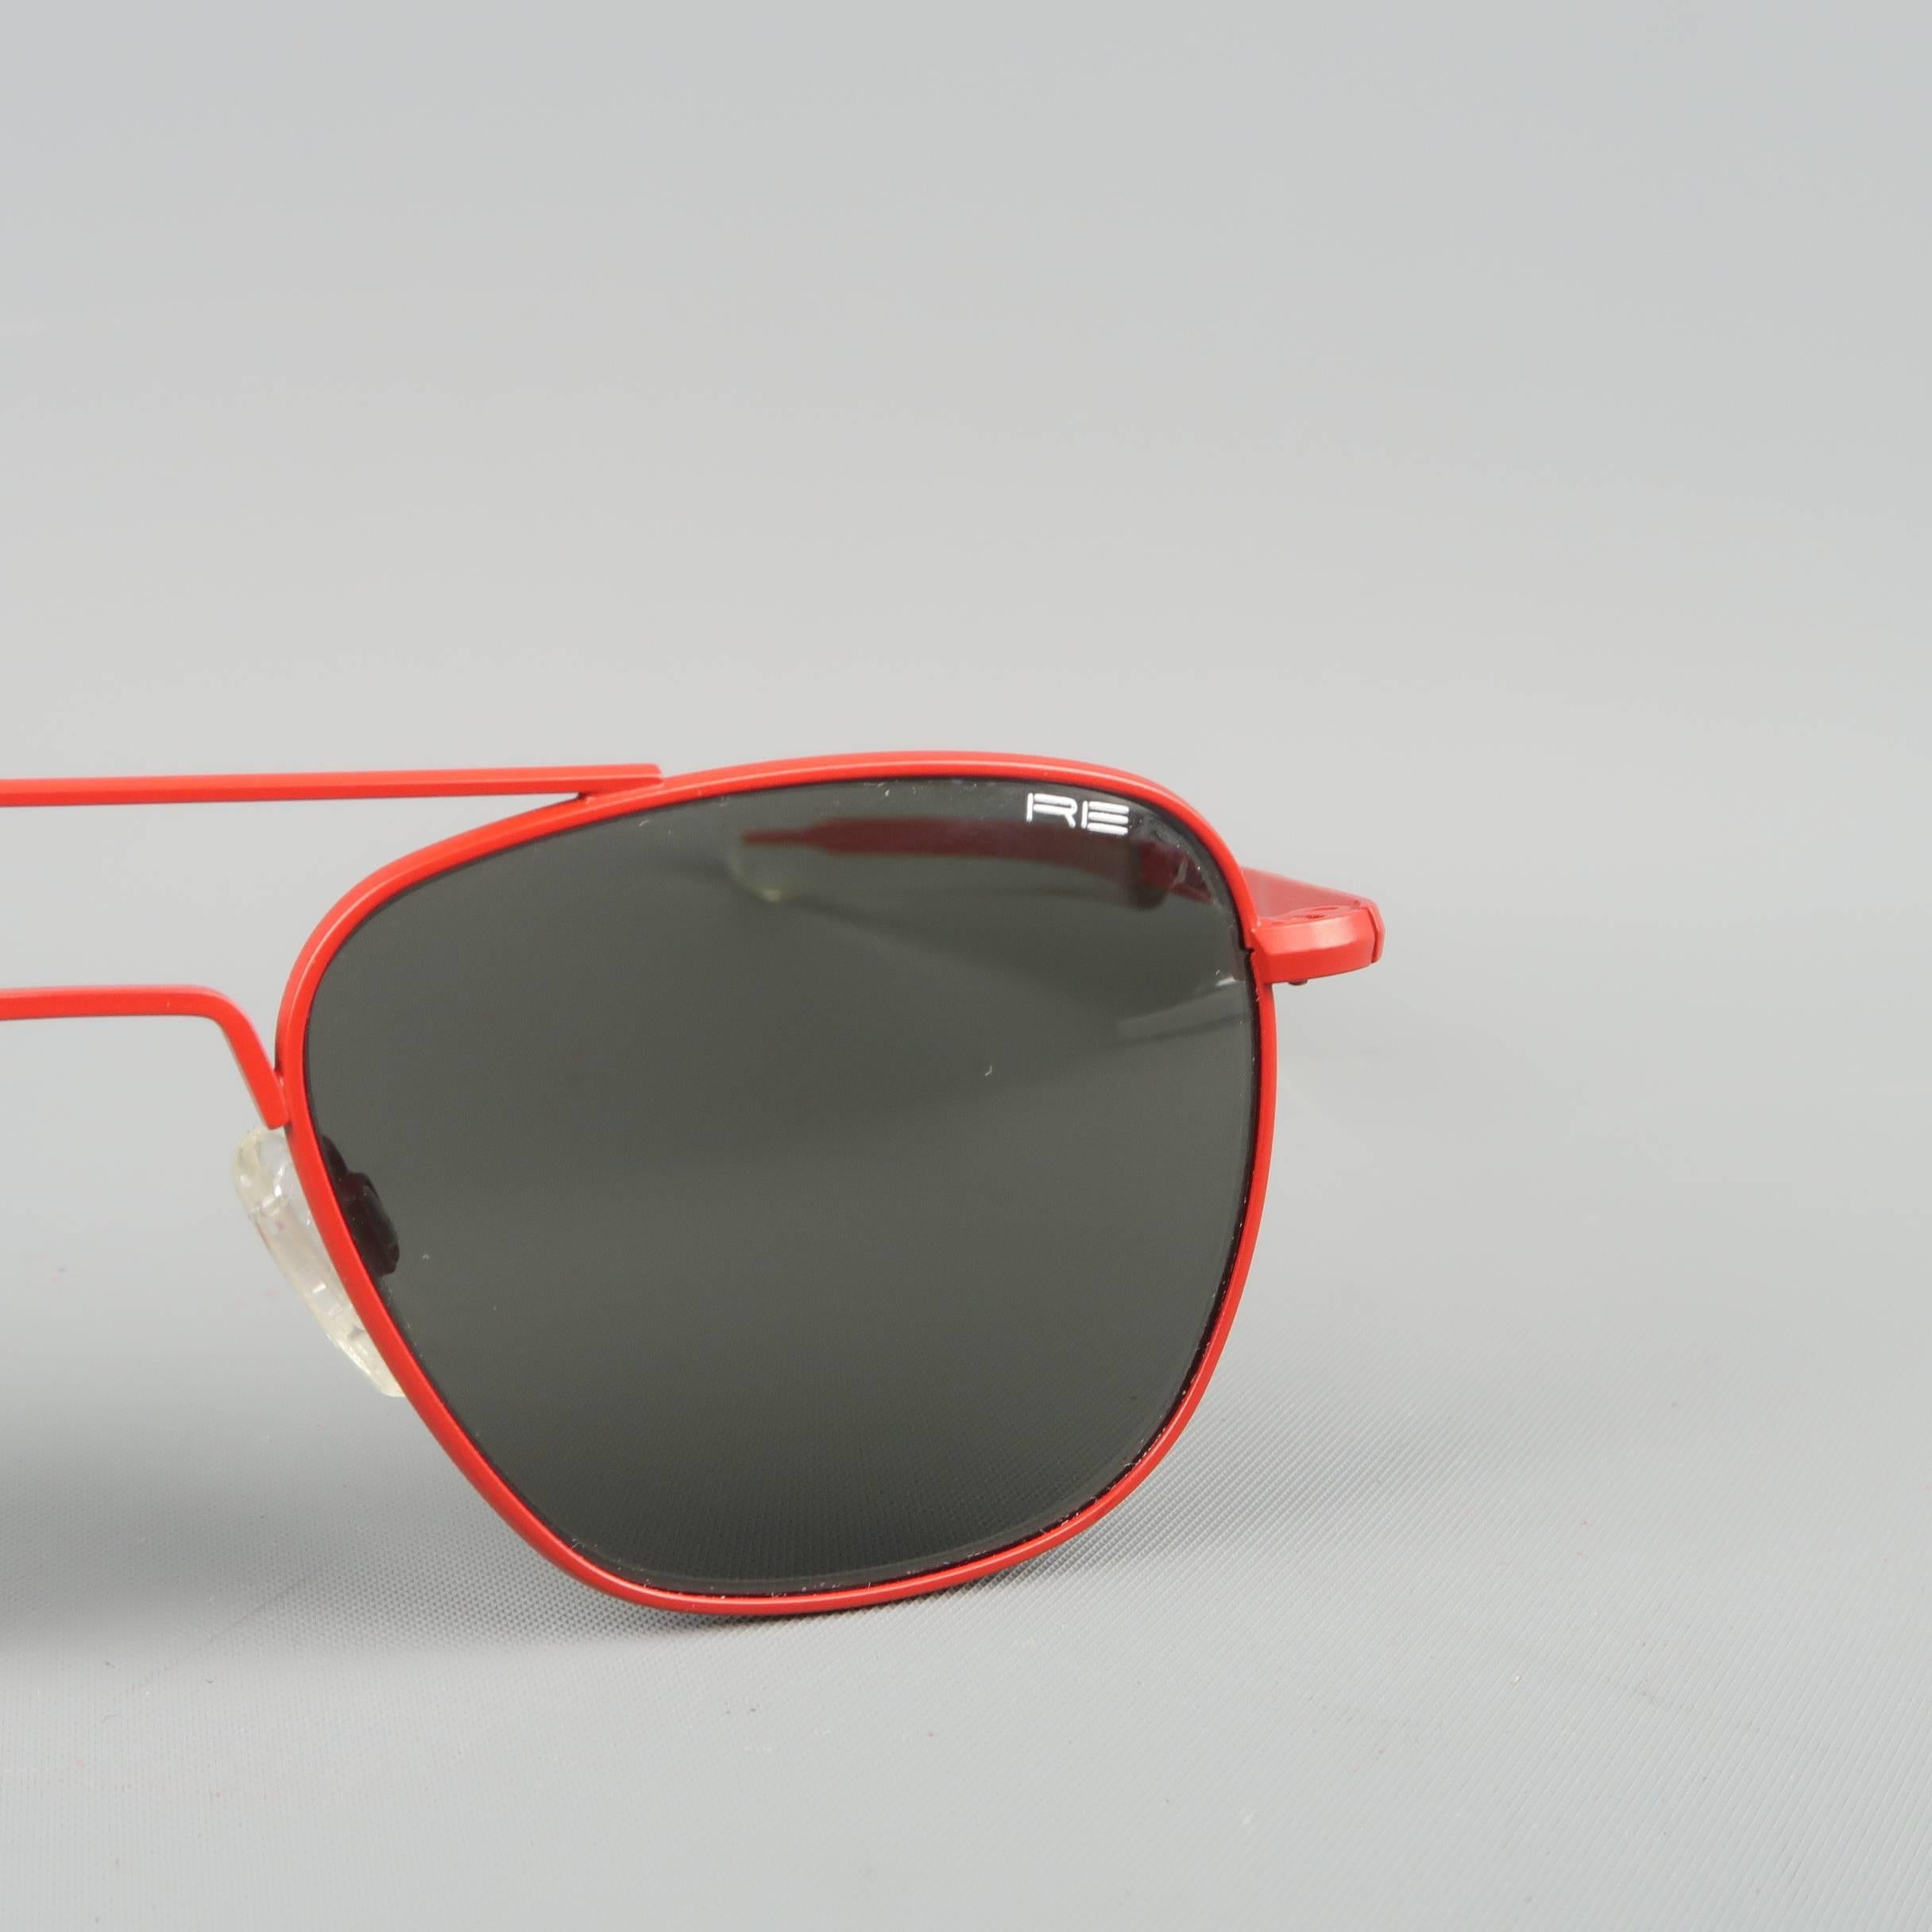 MICHAEL BASTIAN for Randolph Engineering sunglasses come in red matte coated metal in an aviator style with angular black lenses and clear arm ends. Minor Wear. Made in USA.
 
Good Pre-Owned Condition.
Marked: 140mm  
 
Measurements:
 
Width: 12